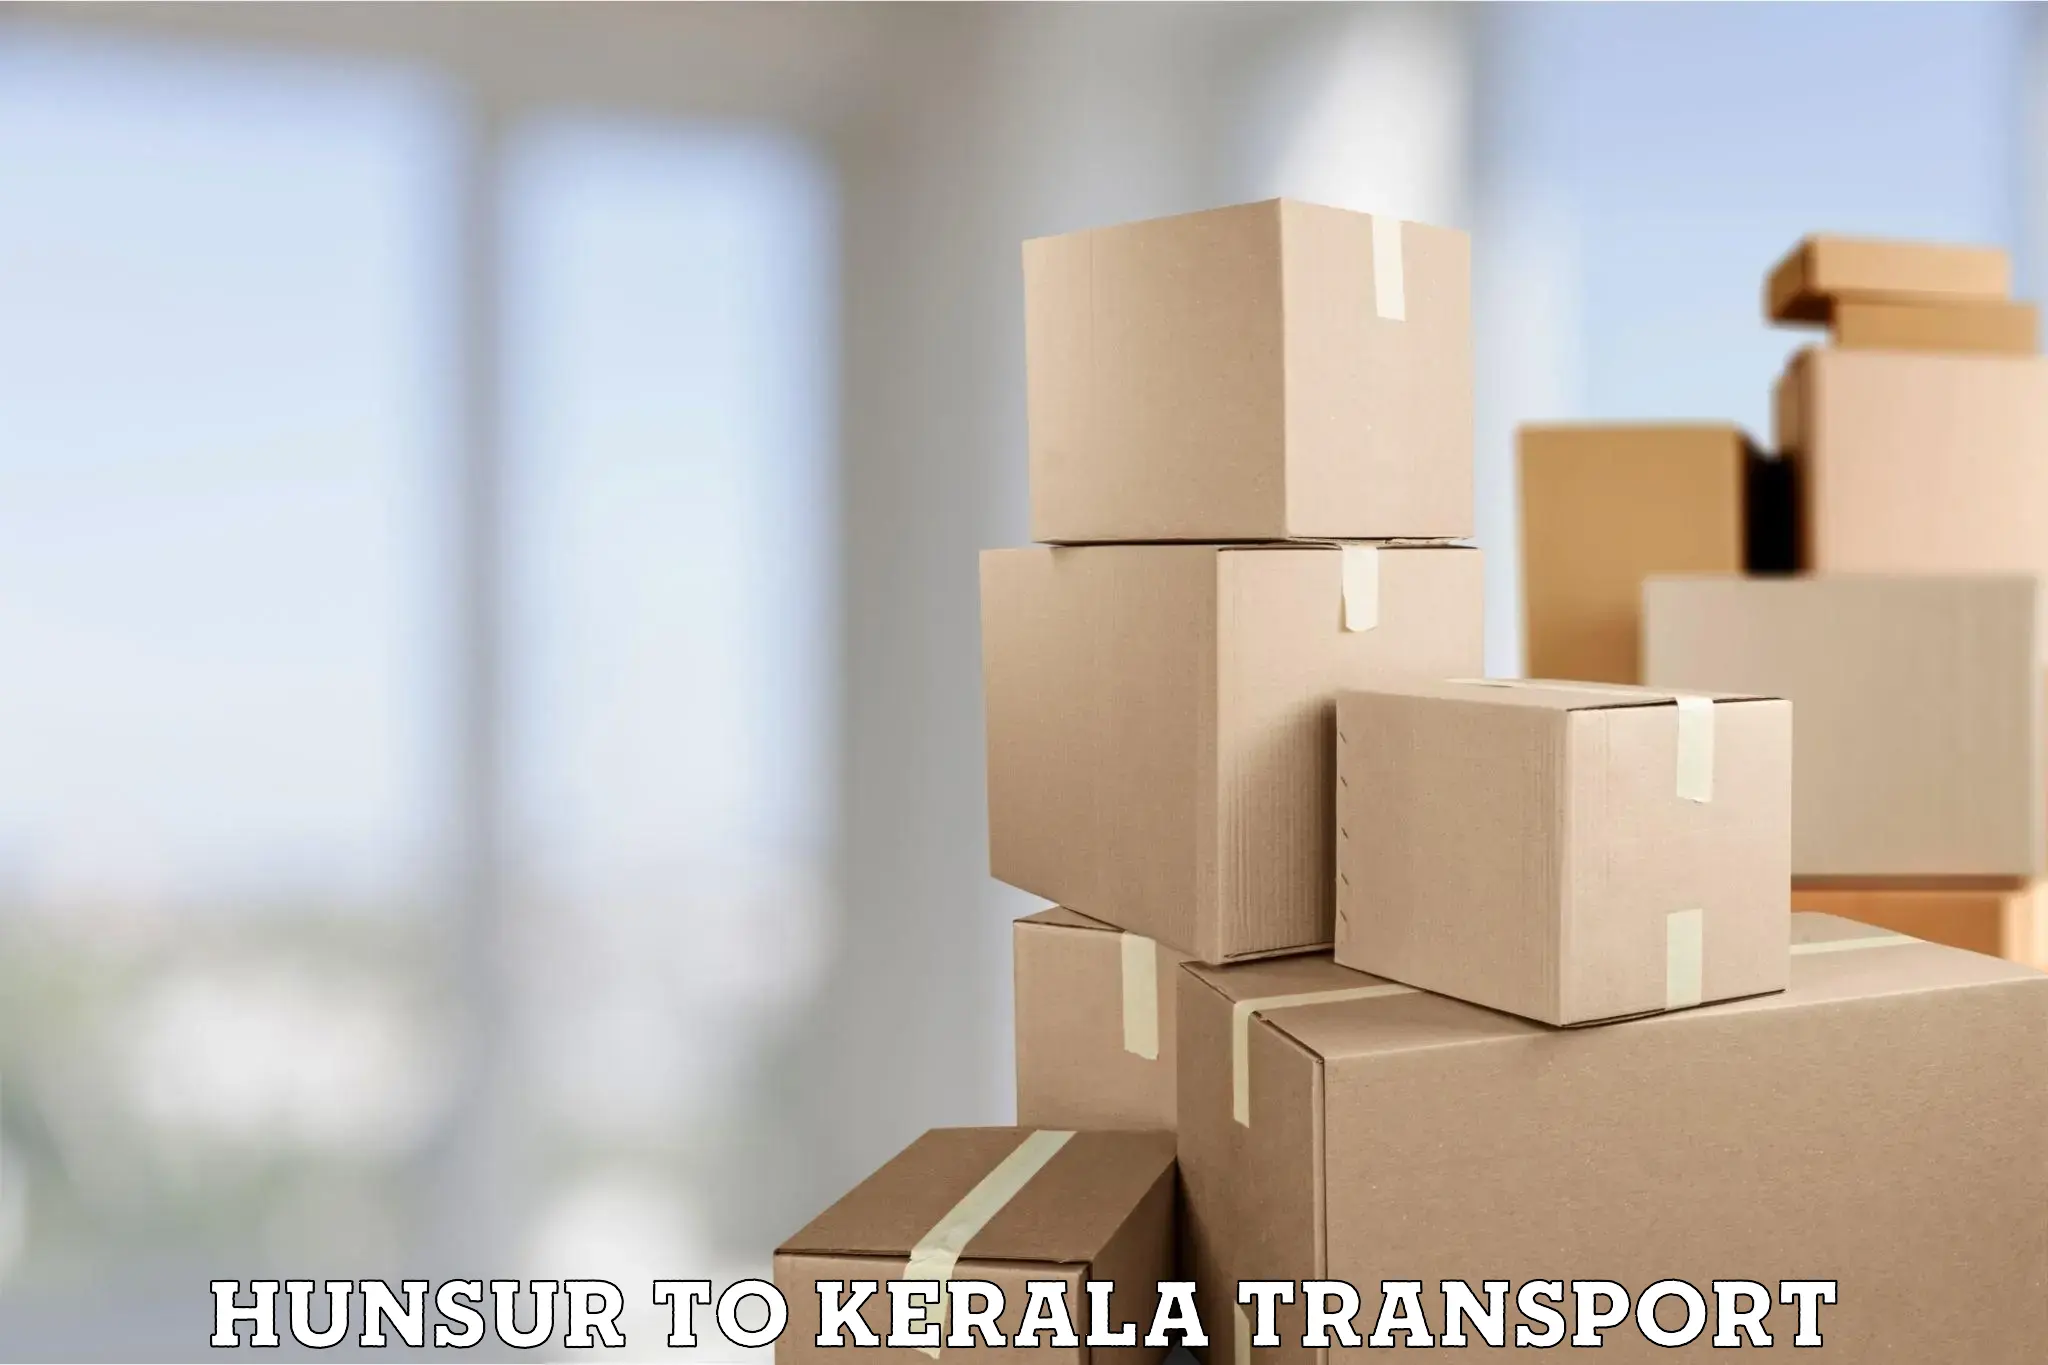 Daily transport service in Hunsur to Kerala